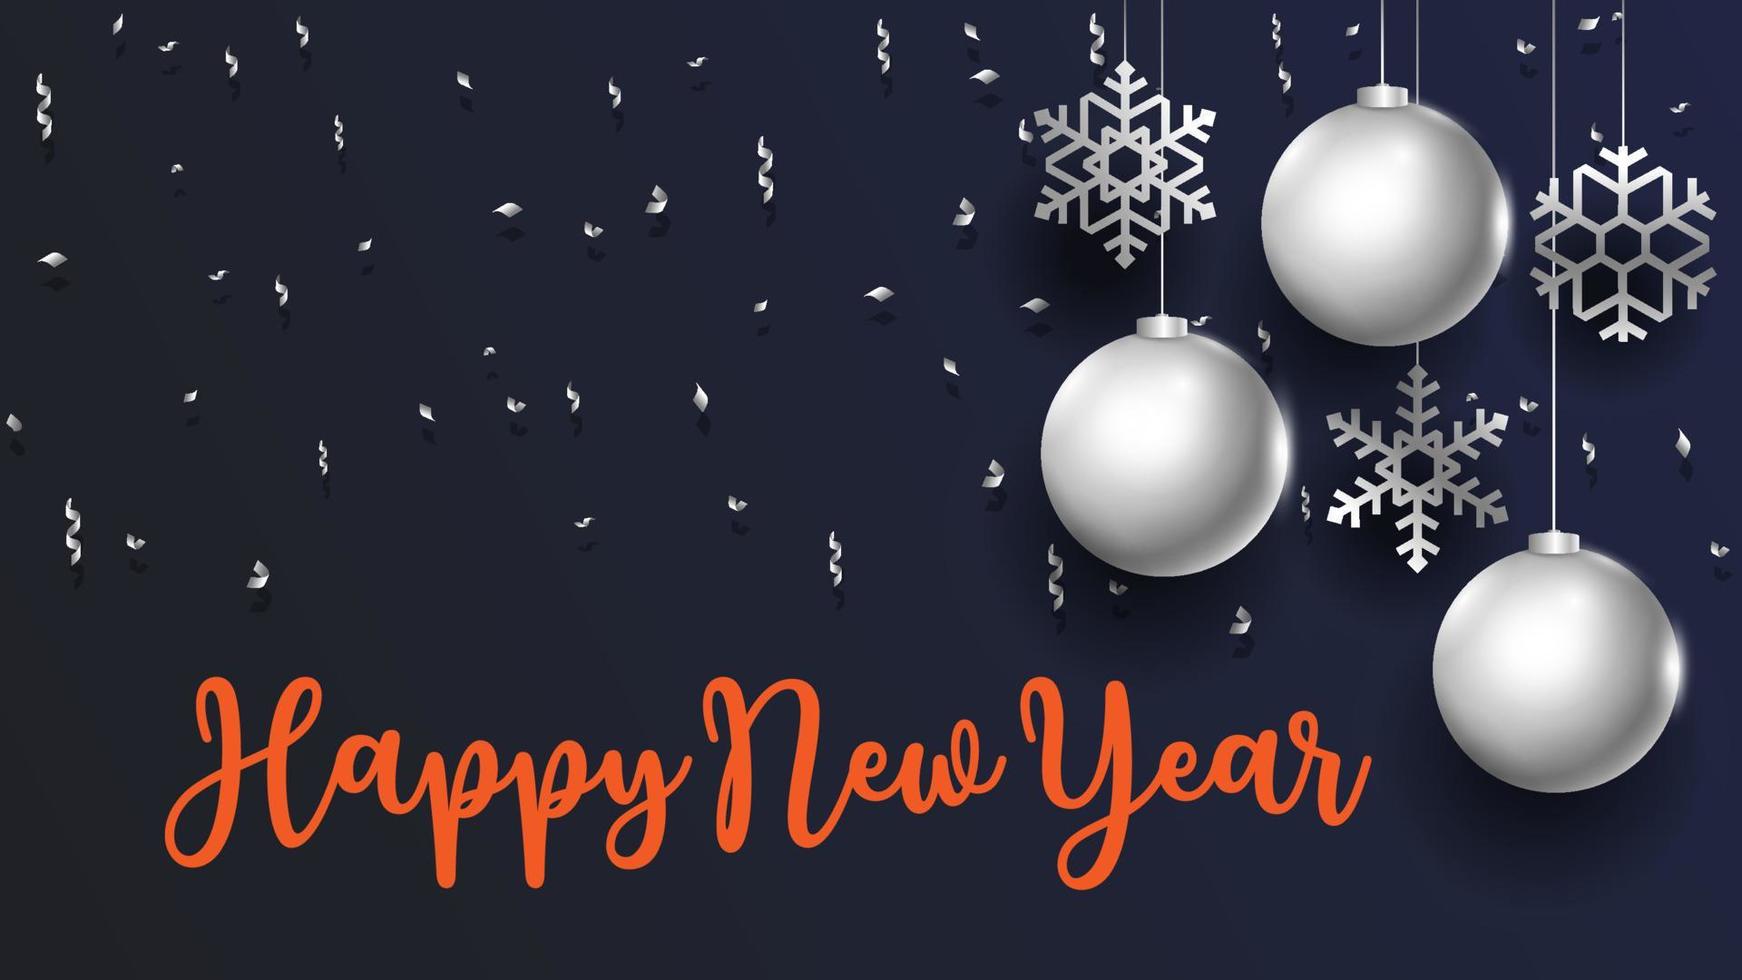 Happy New Year celebration poster with silver glass balls and snowflakes vector